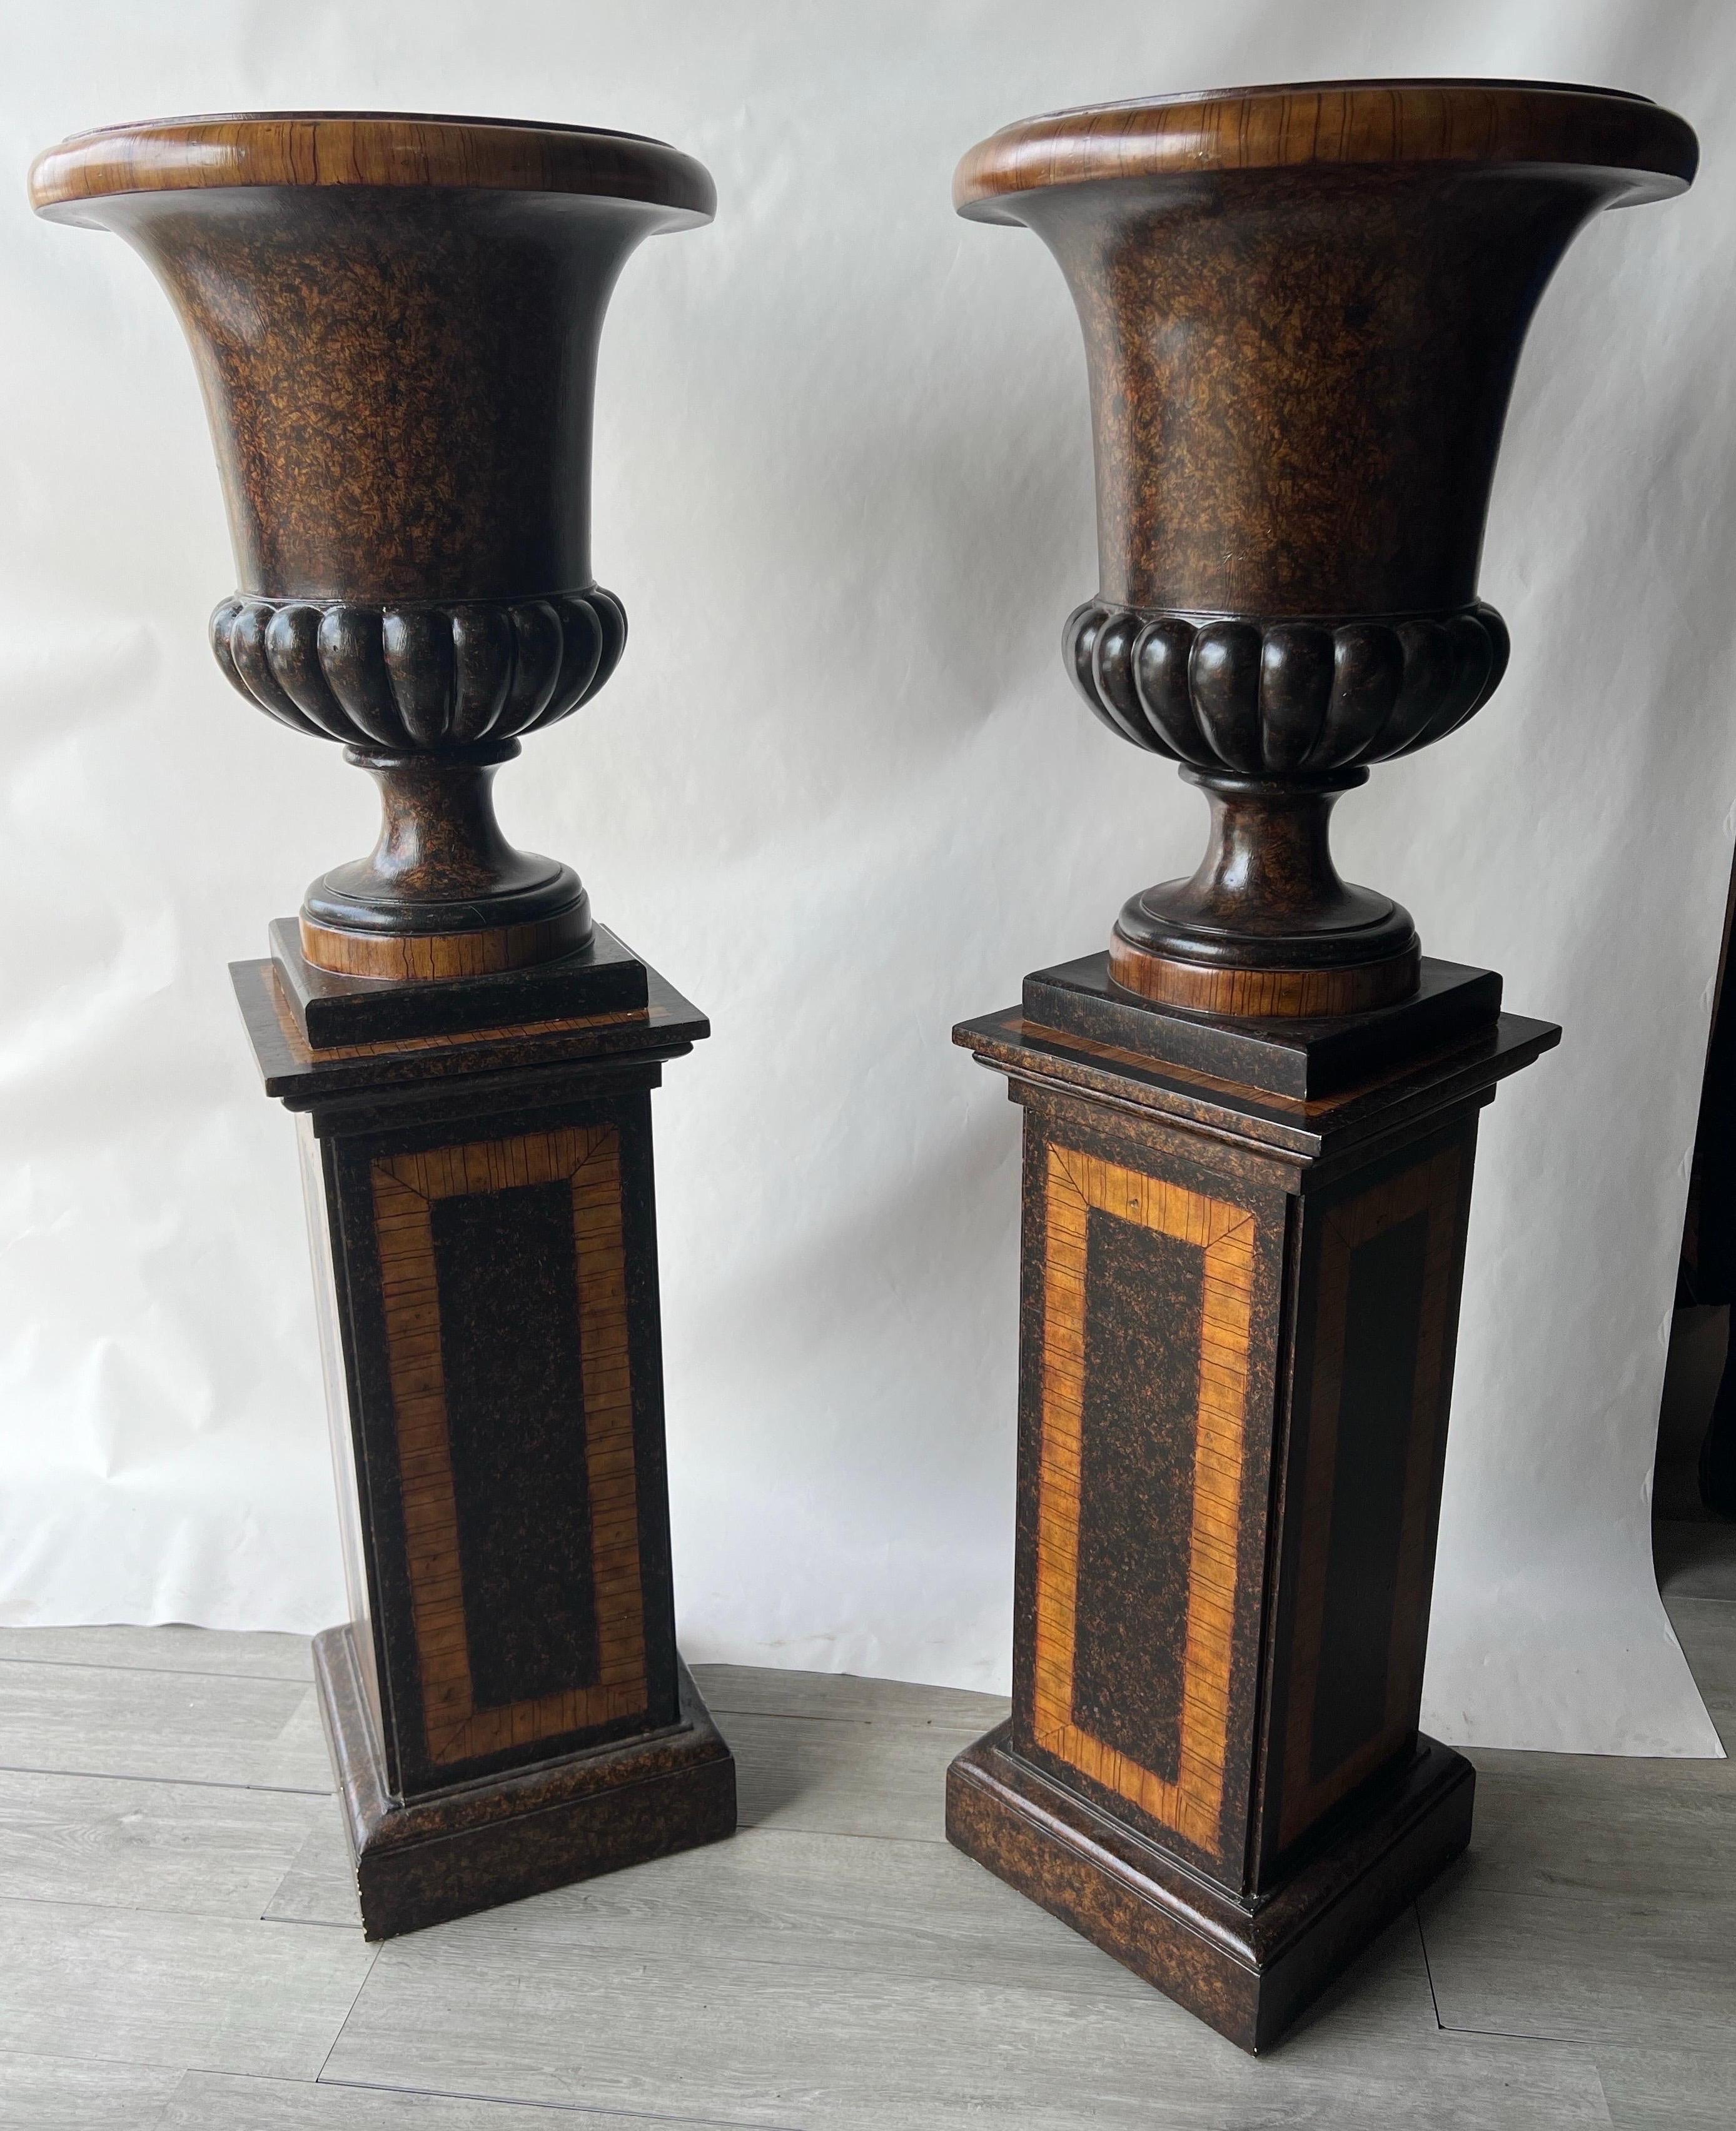 Beautifully decorated pair of faux tortoiseshell interior urns. Fabulously painted urns and pedestals- could be used together or separate as the pedestals are entirely painted  as well. Please look at the close ups of the decoration- as good as it